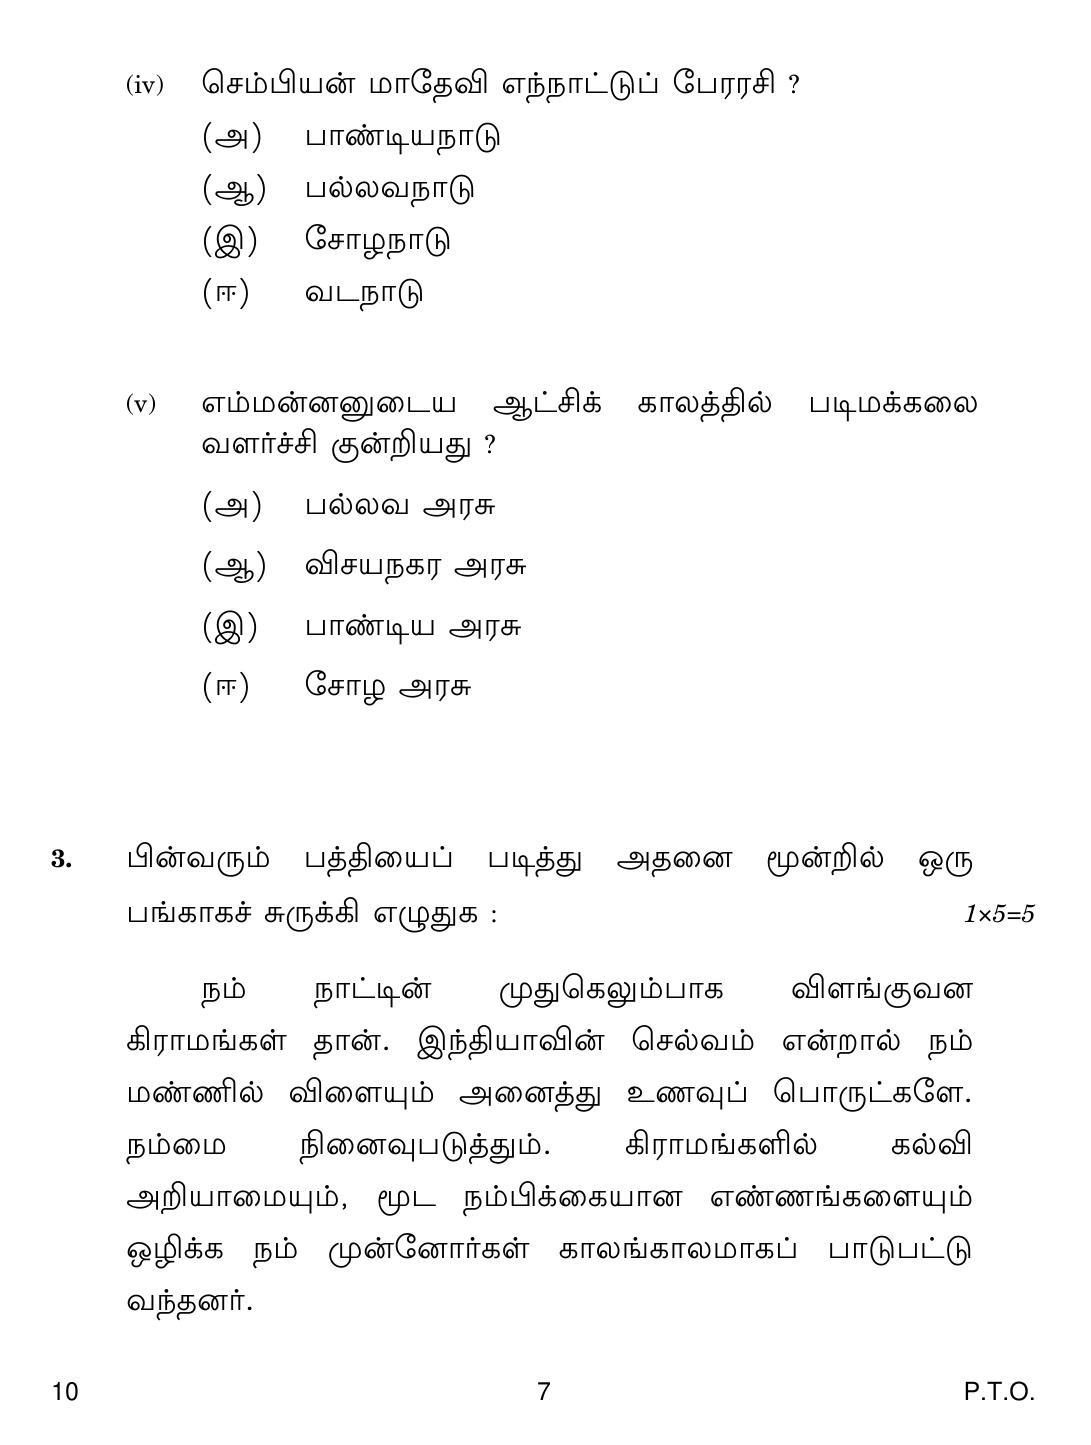 CBSE Class 10 10 Tamil 2019 Question Paper - Page 7